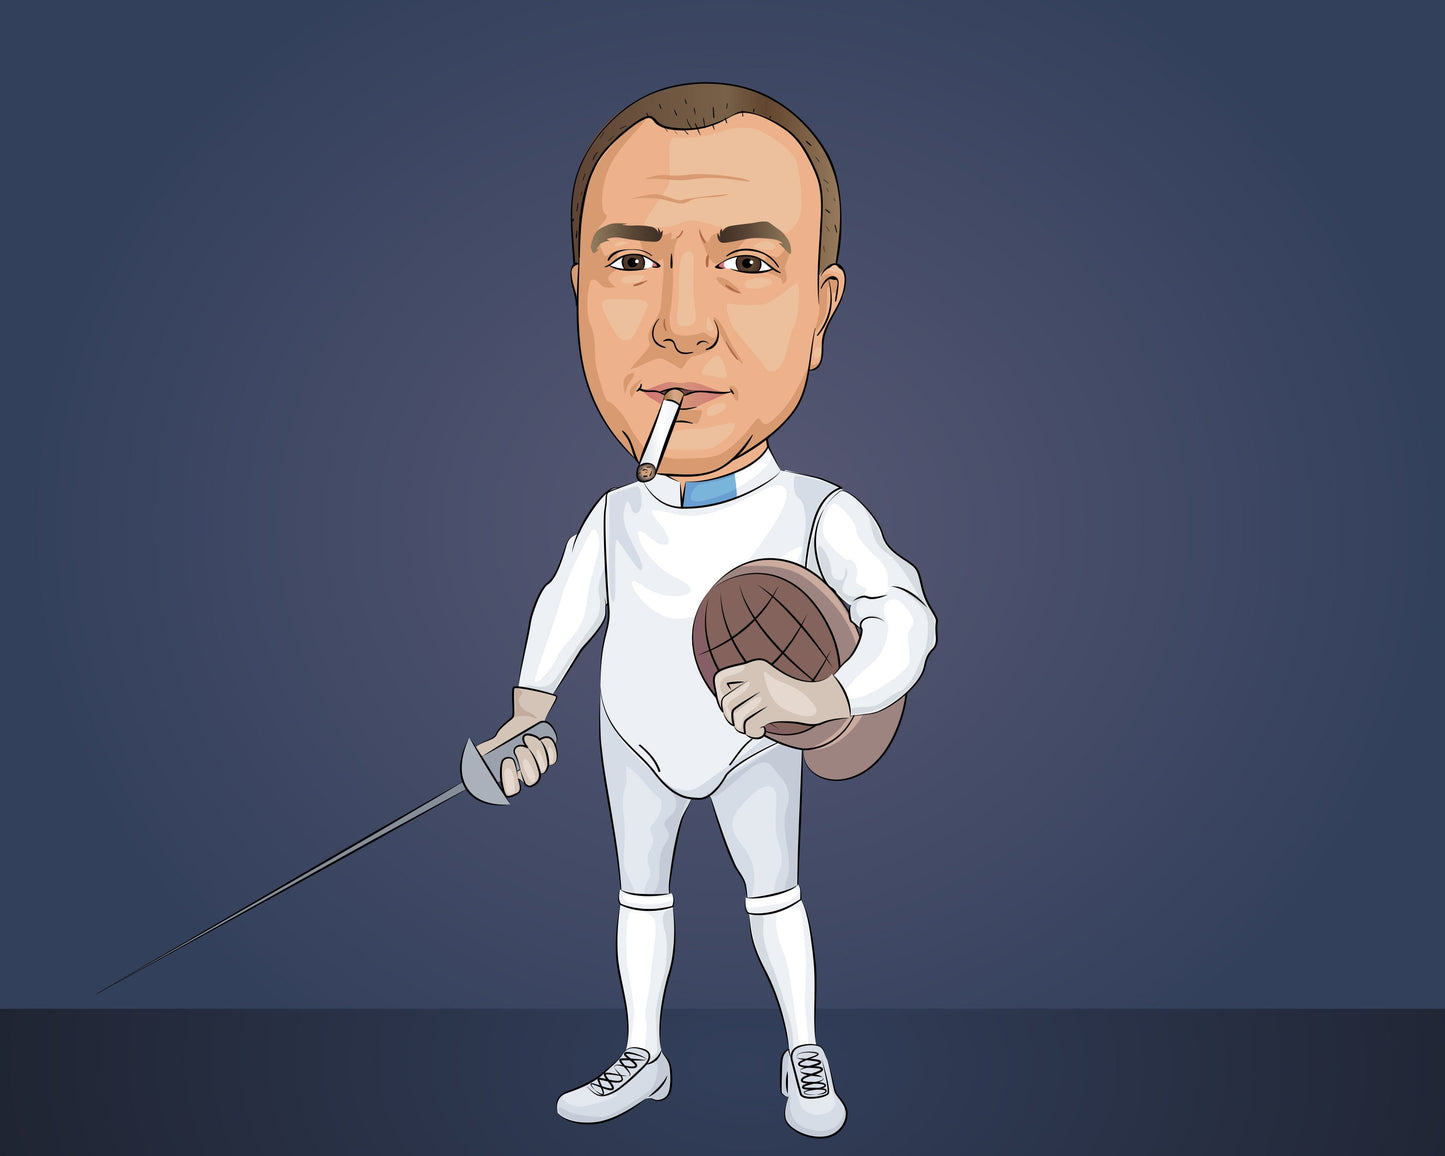 Fencing Gift - Custom Caricature Portrait From Your Photo/Fencer gift